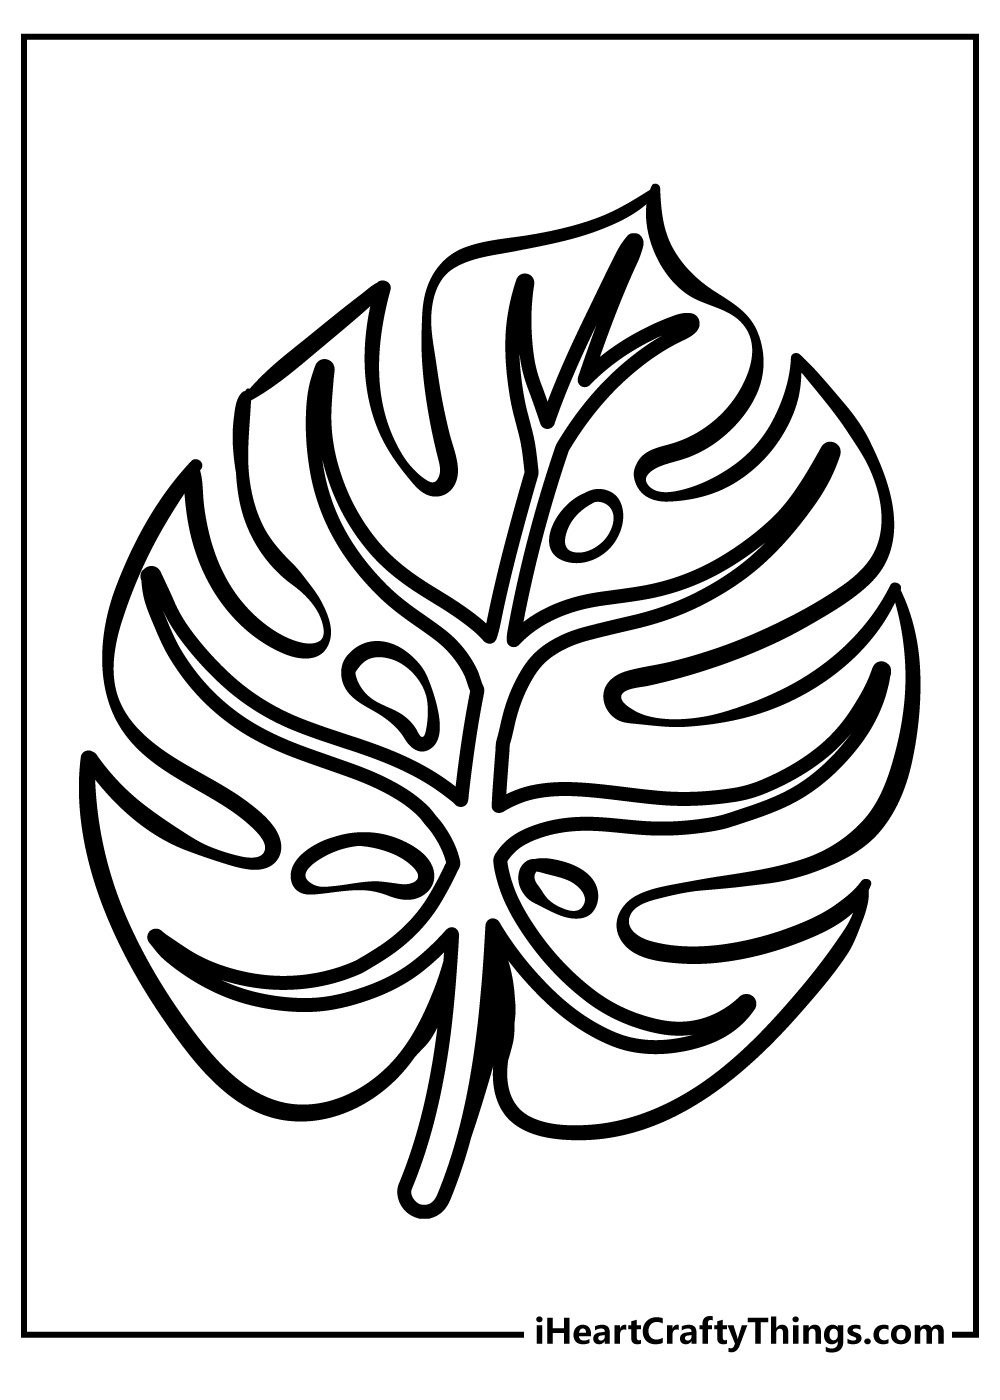 Leaf Coloring Pages for adults free printable